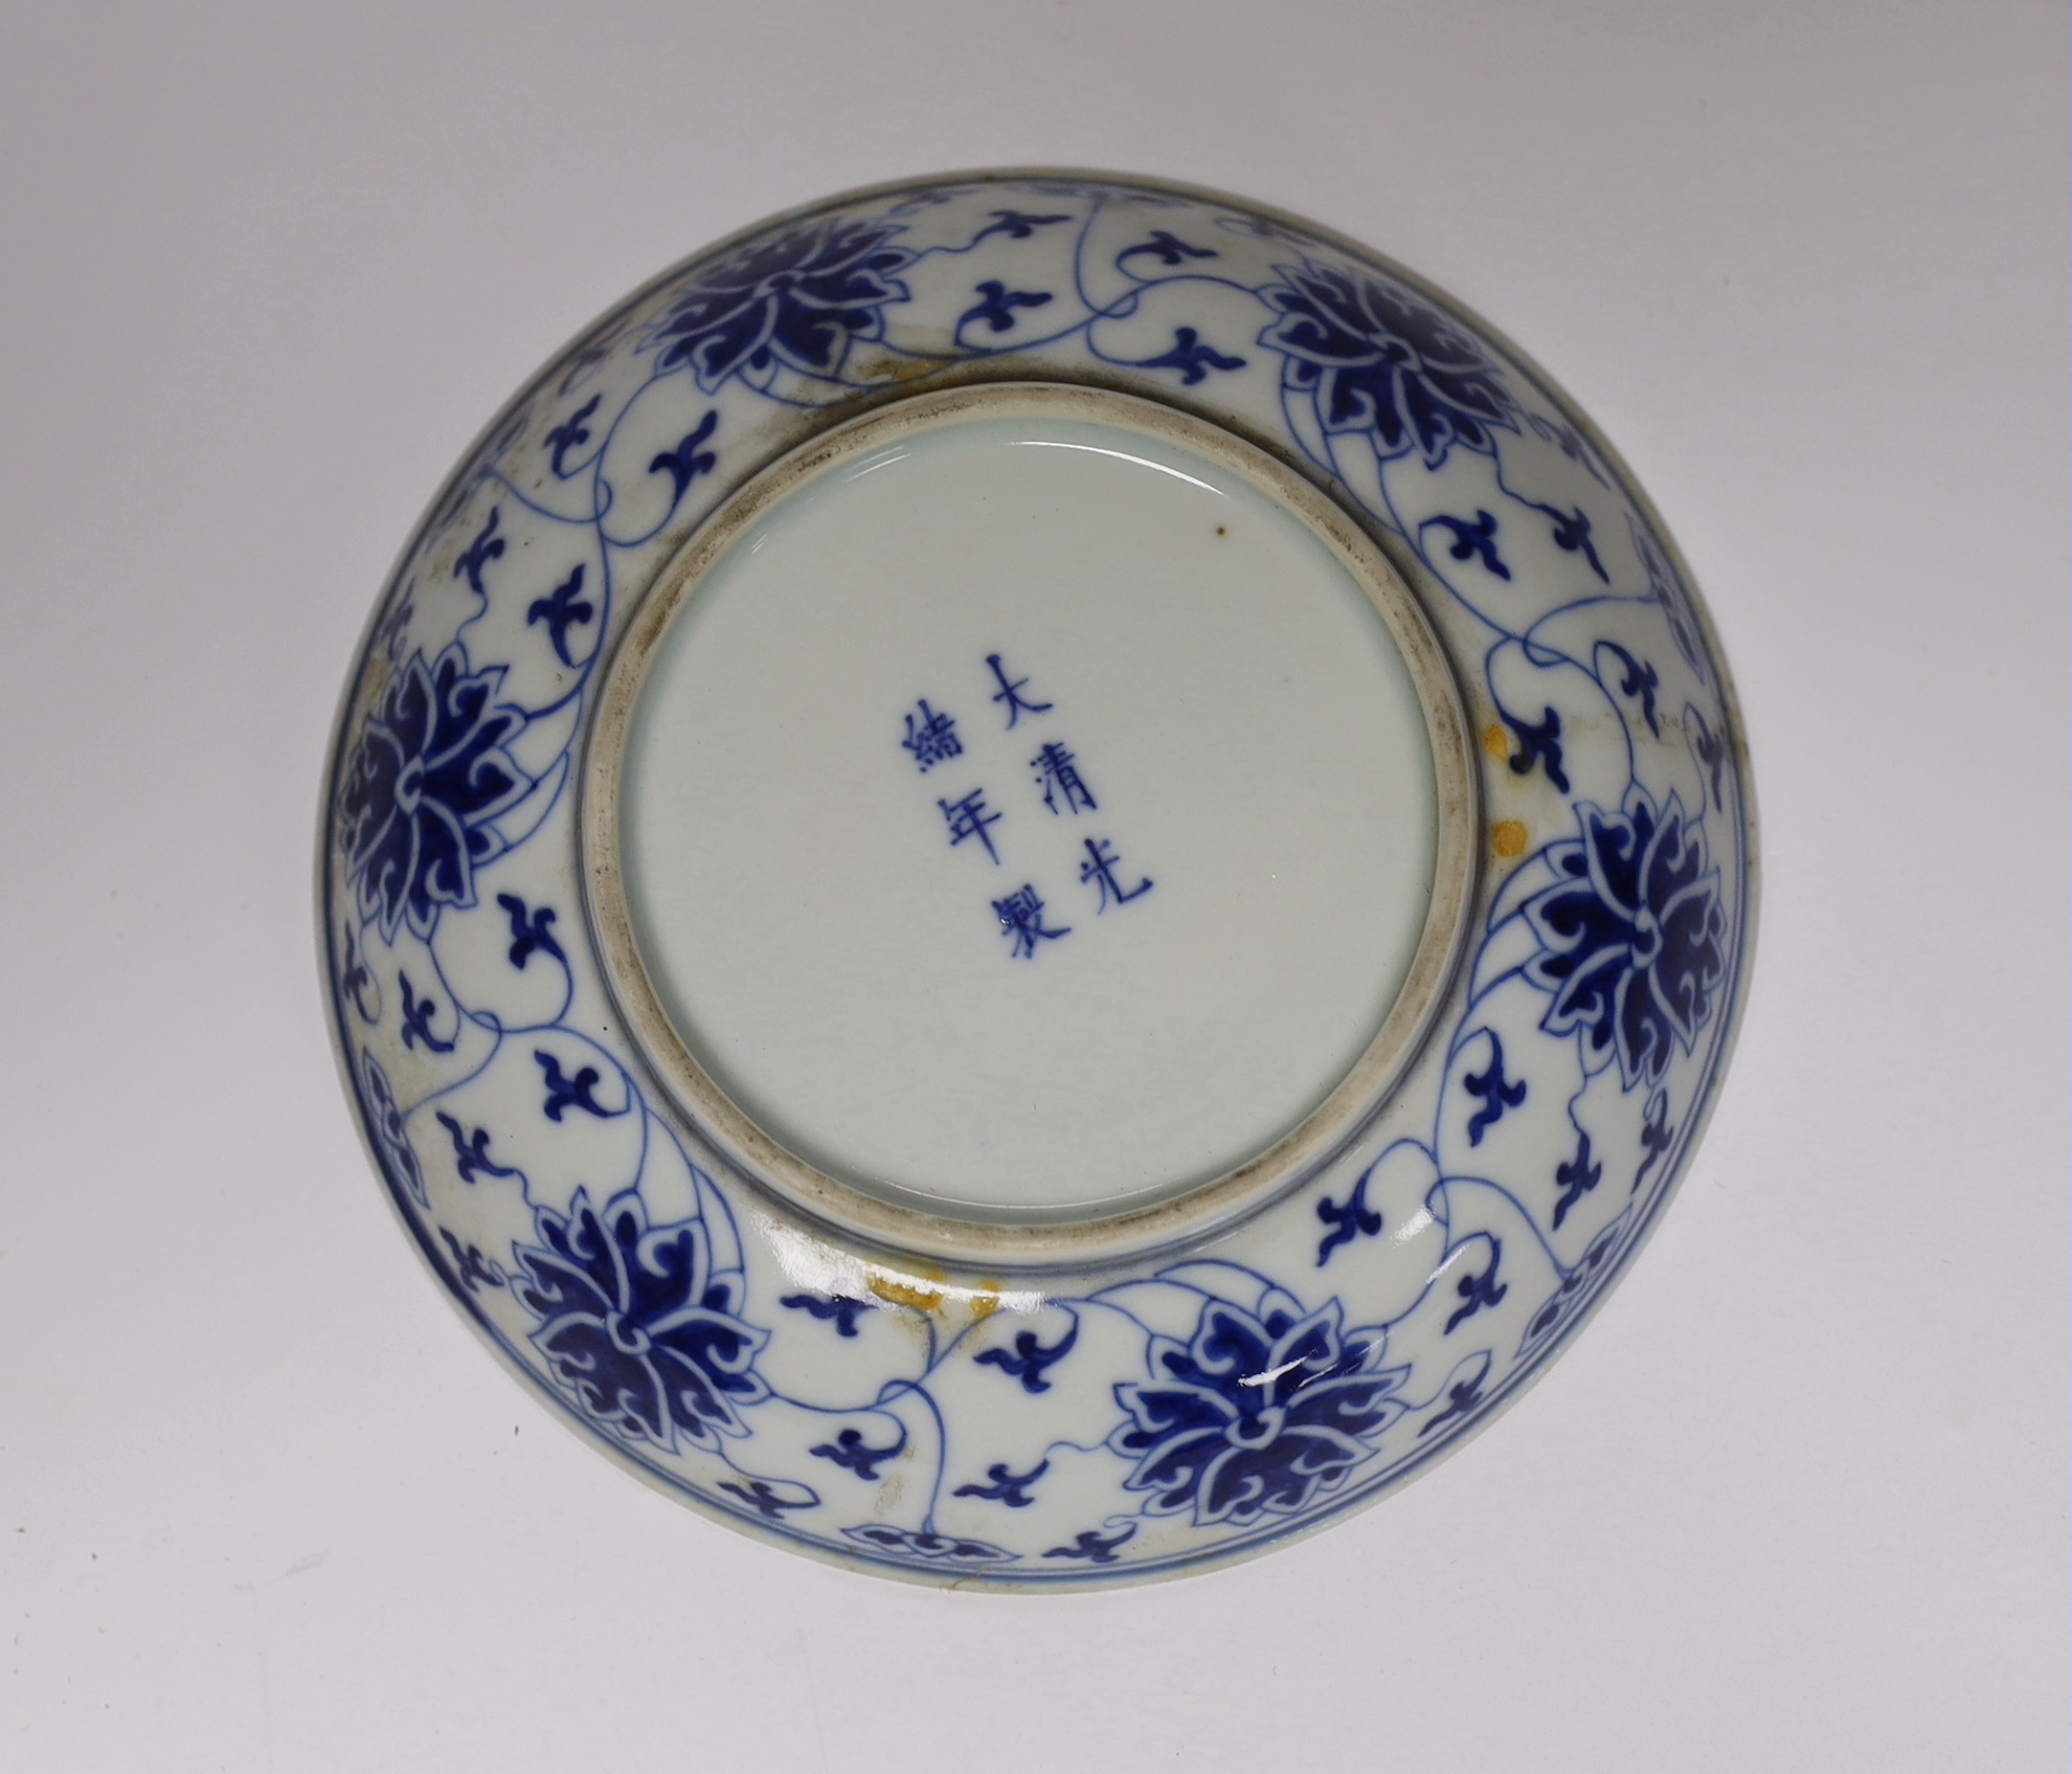 A Chinese blue and white lotus saucer dish, Guangxu mark and of the period (1875-1908), 15.5cm - Image 2 of 2